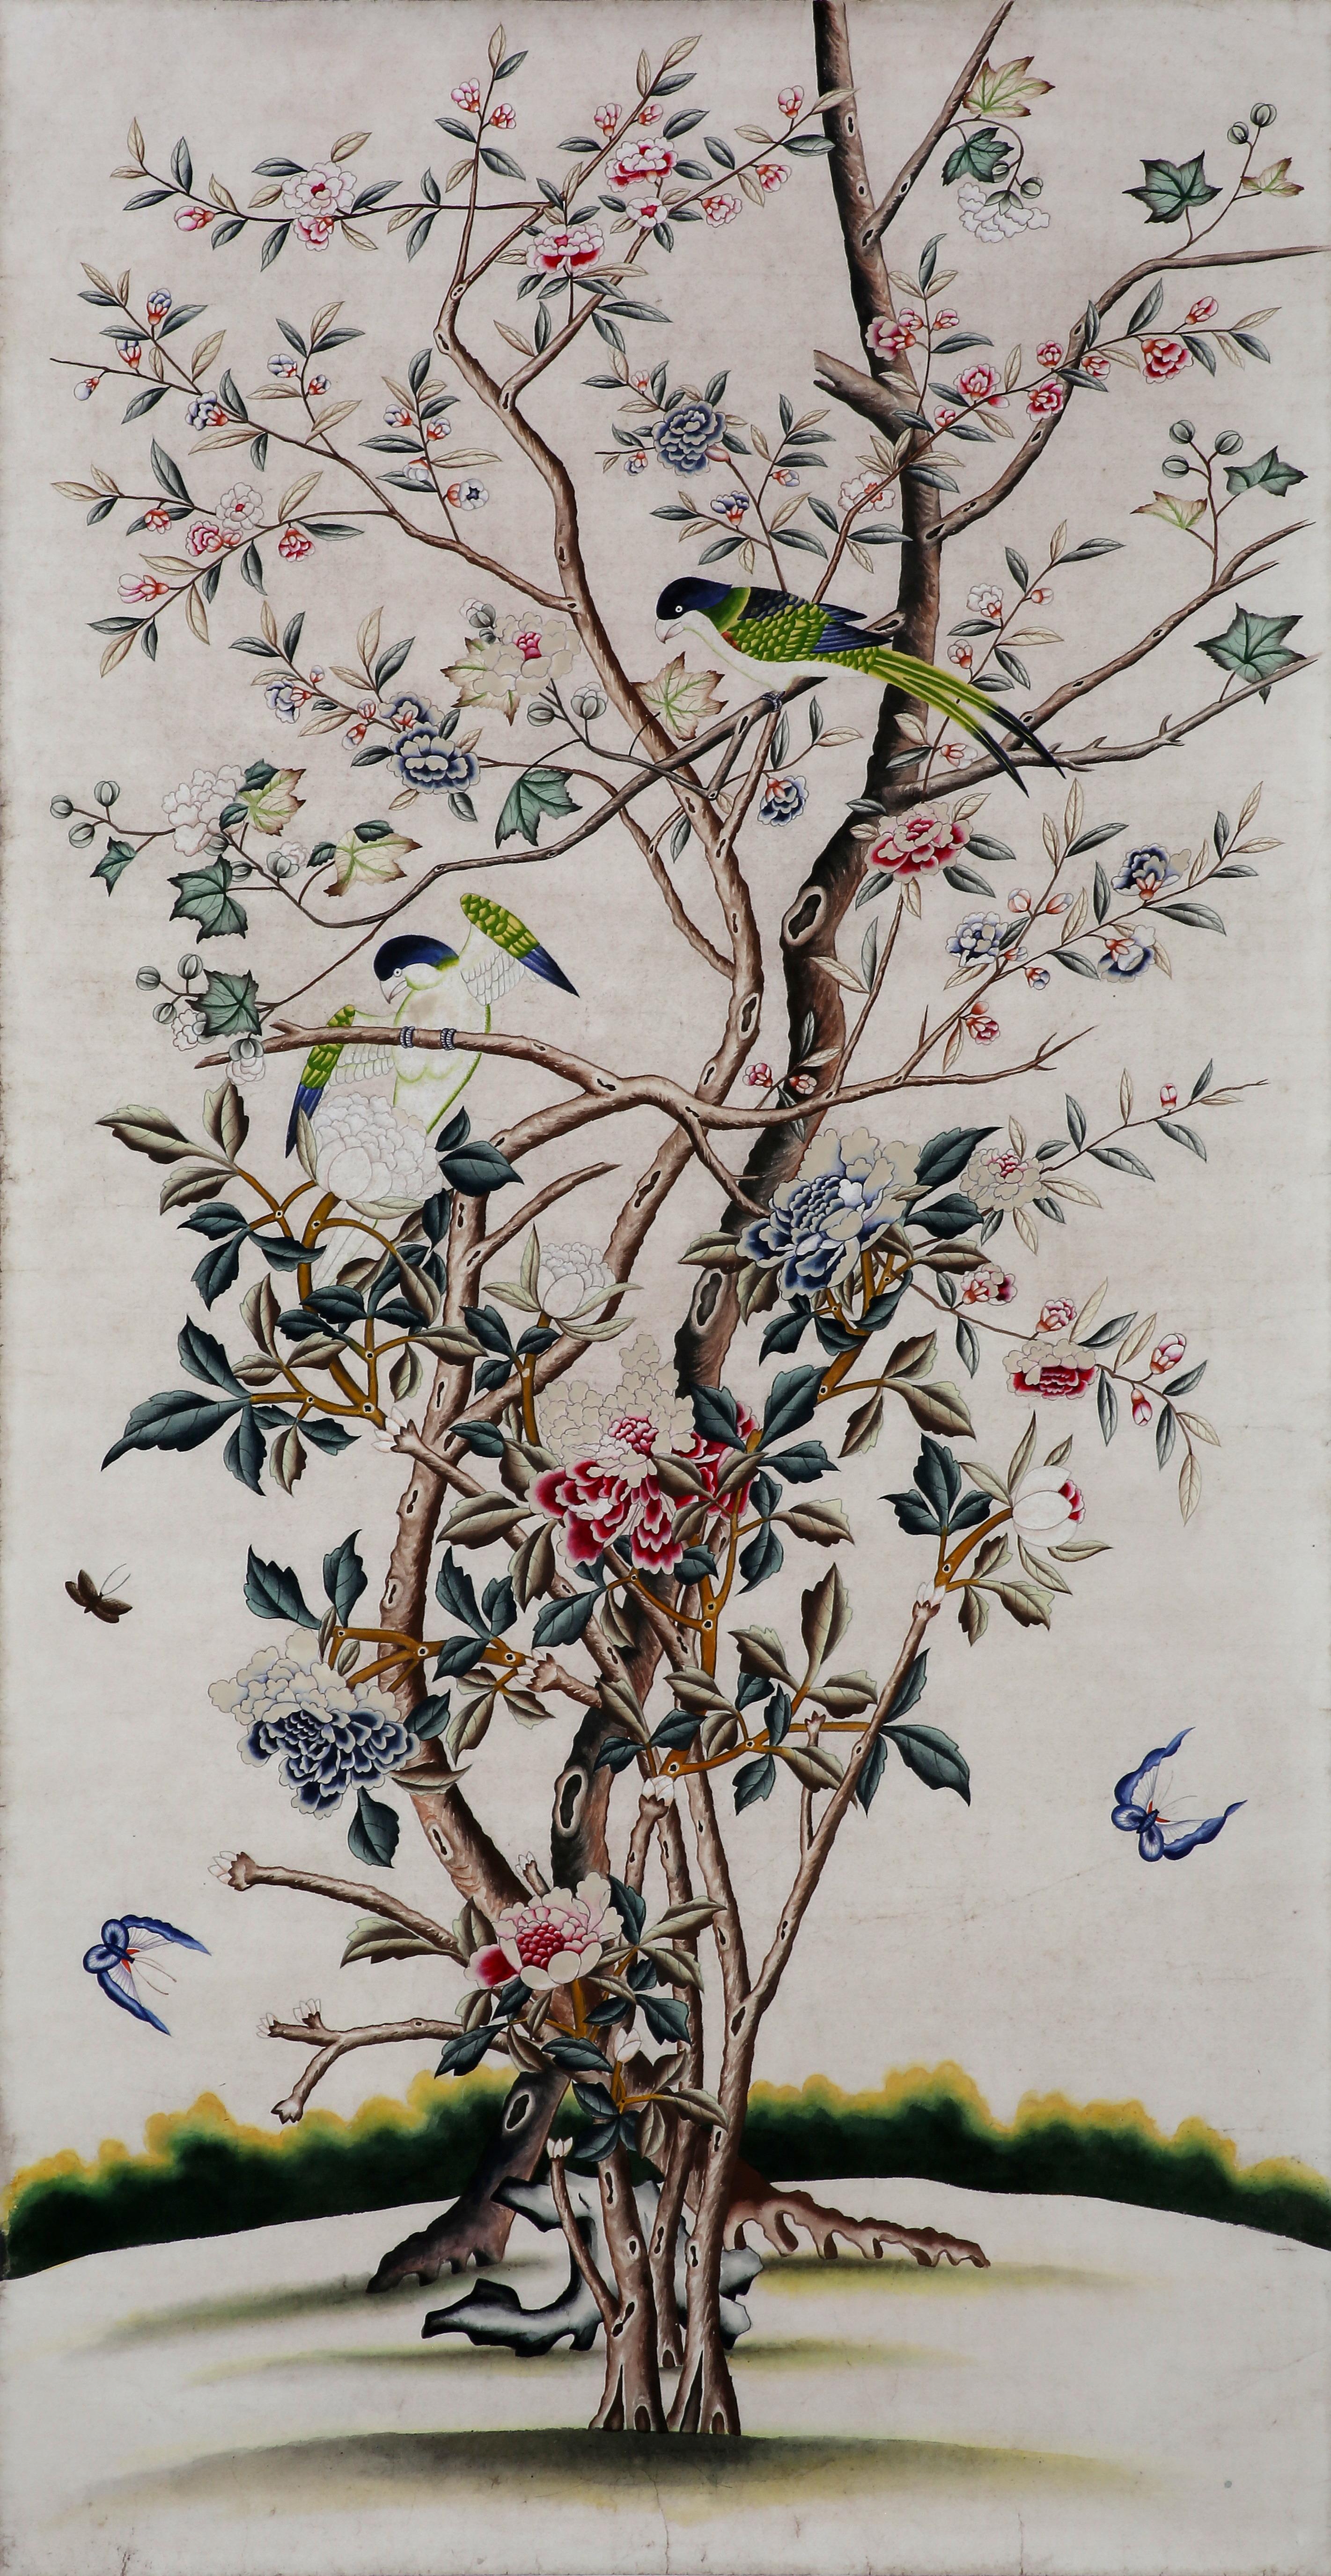 The pair of original paintings inspired by the 19th century Chinese export trade chinoiserie paintings of tree, flower & bird motif on wallpaper, in watercolor on mounted rice paper, from our studio. An antiquing process is applied to the paintings